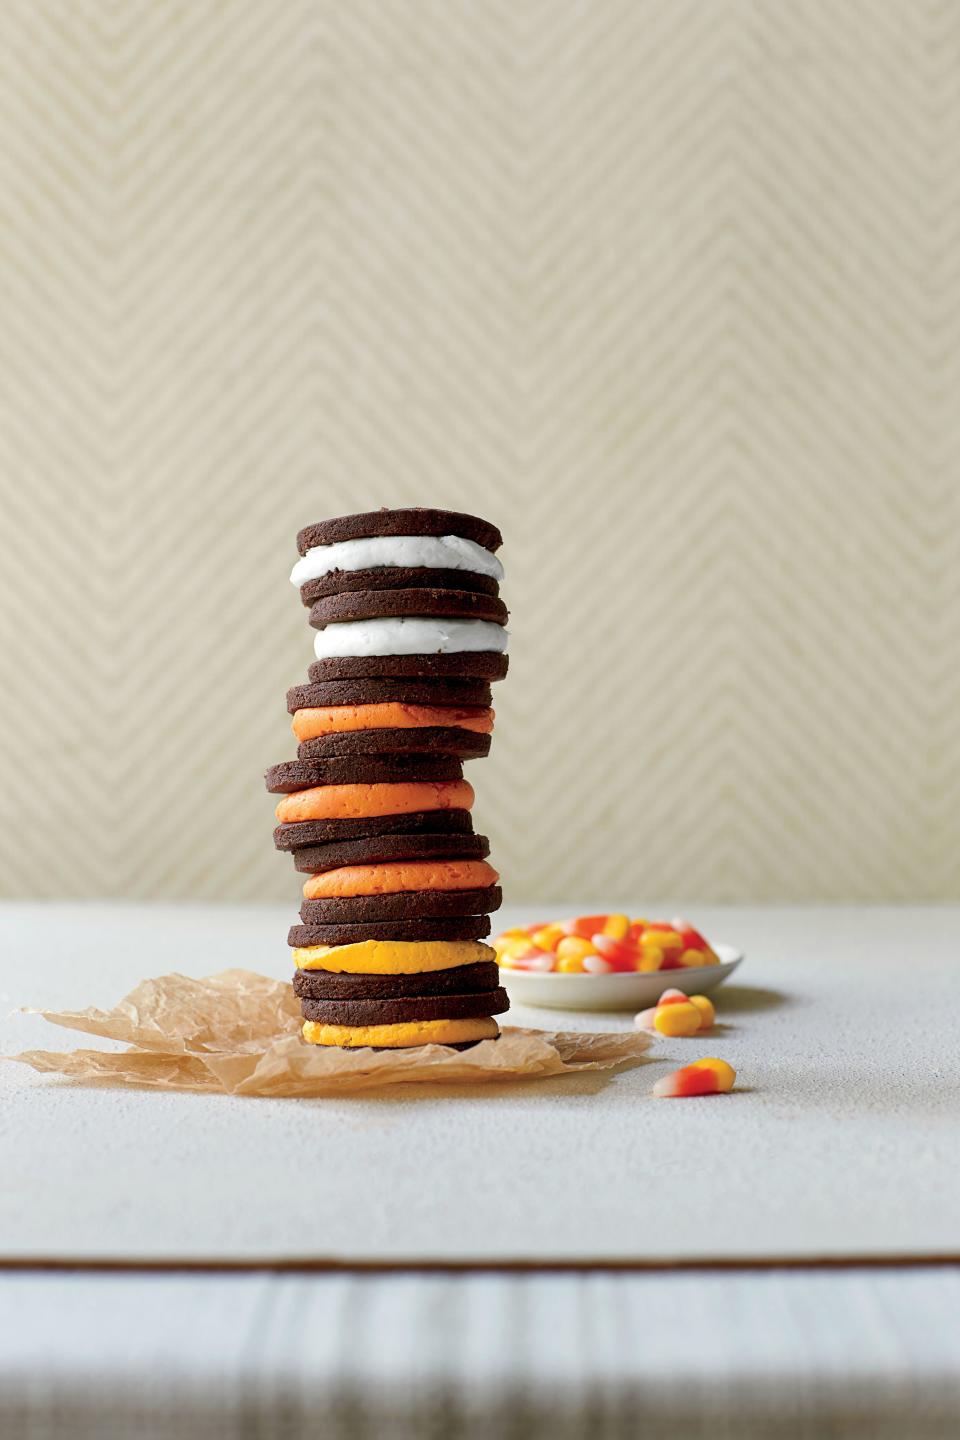 Crème-Filled Chocolate Sandwich Cookies